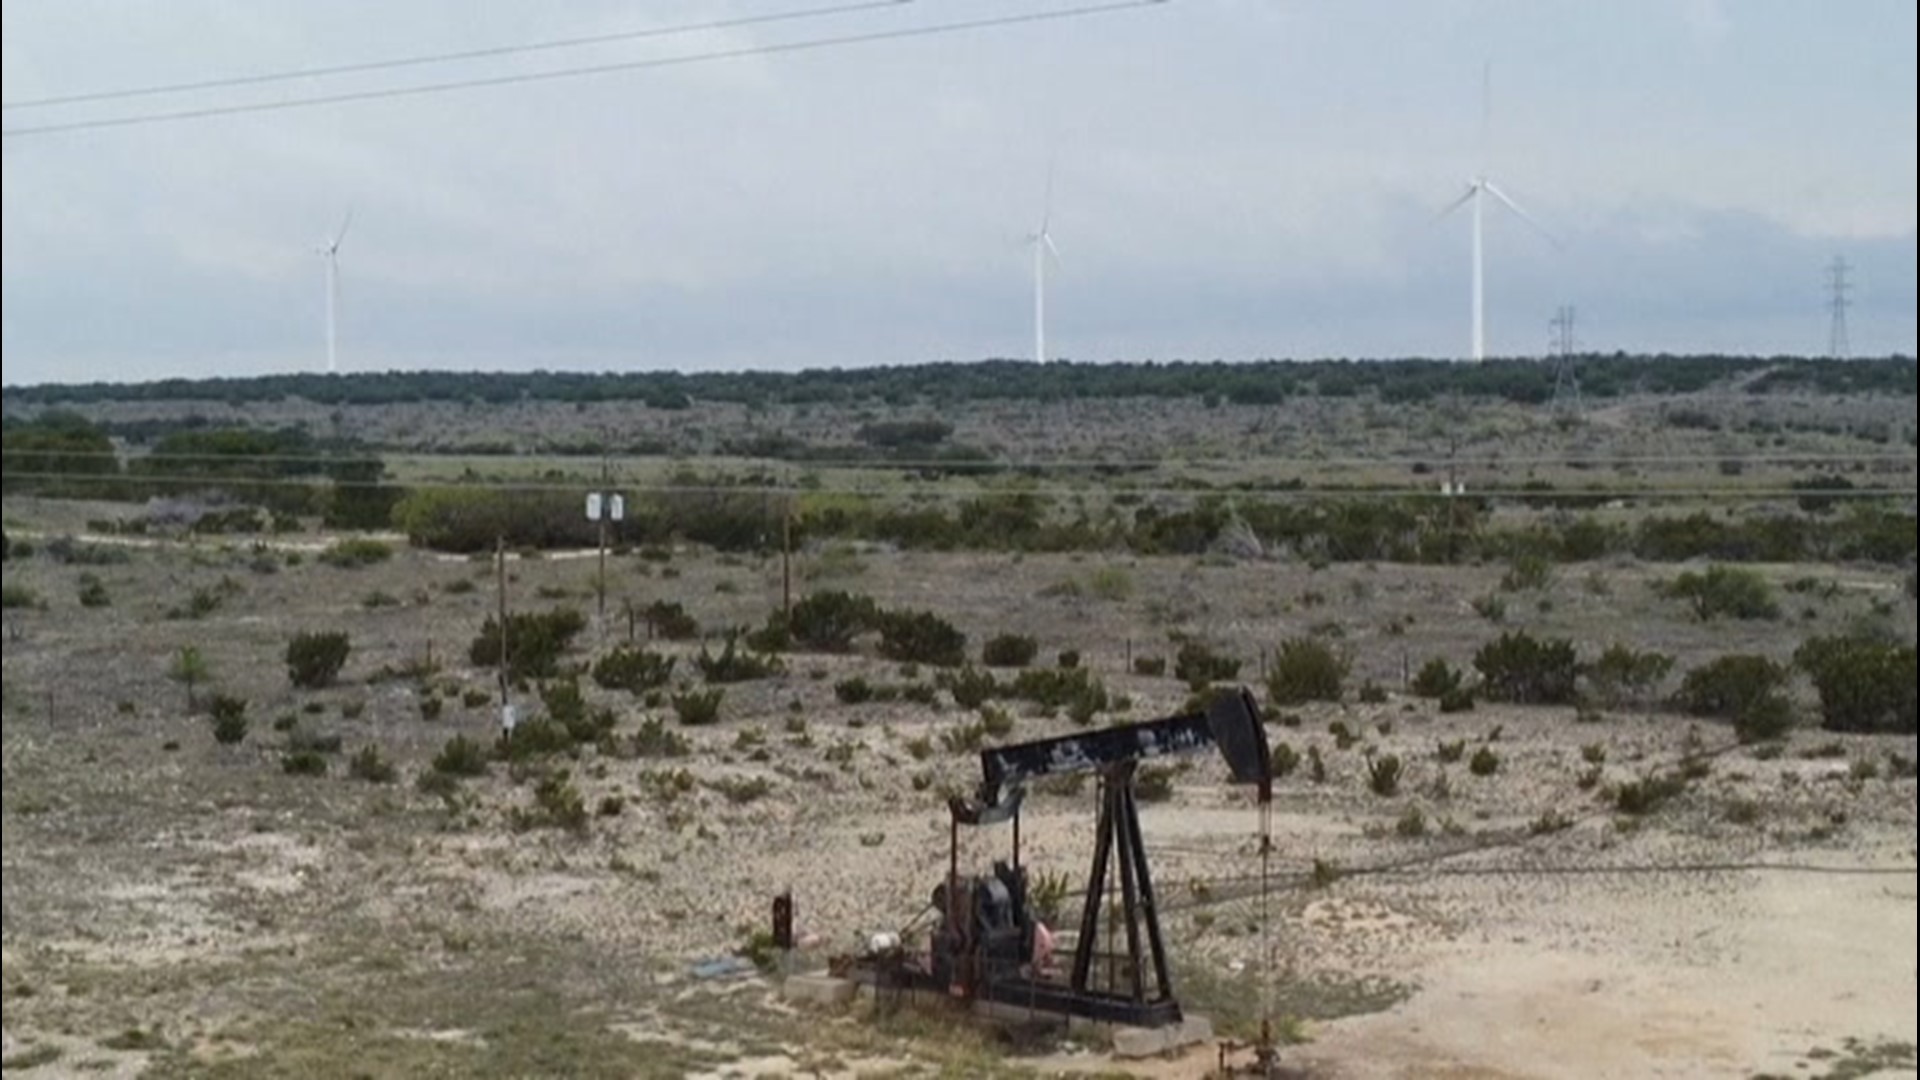 Bobby Helmers has been raising cattle on his ranch for decades, and until recently, his ranch hosted oil wells too. But now, he's plugged the pumps and installed wind turbines instead.